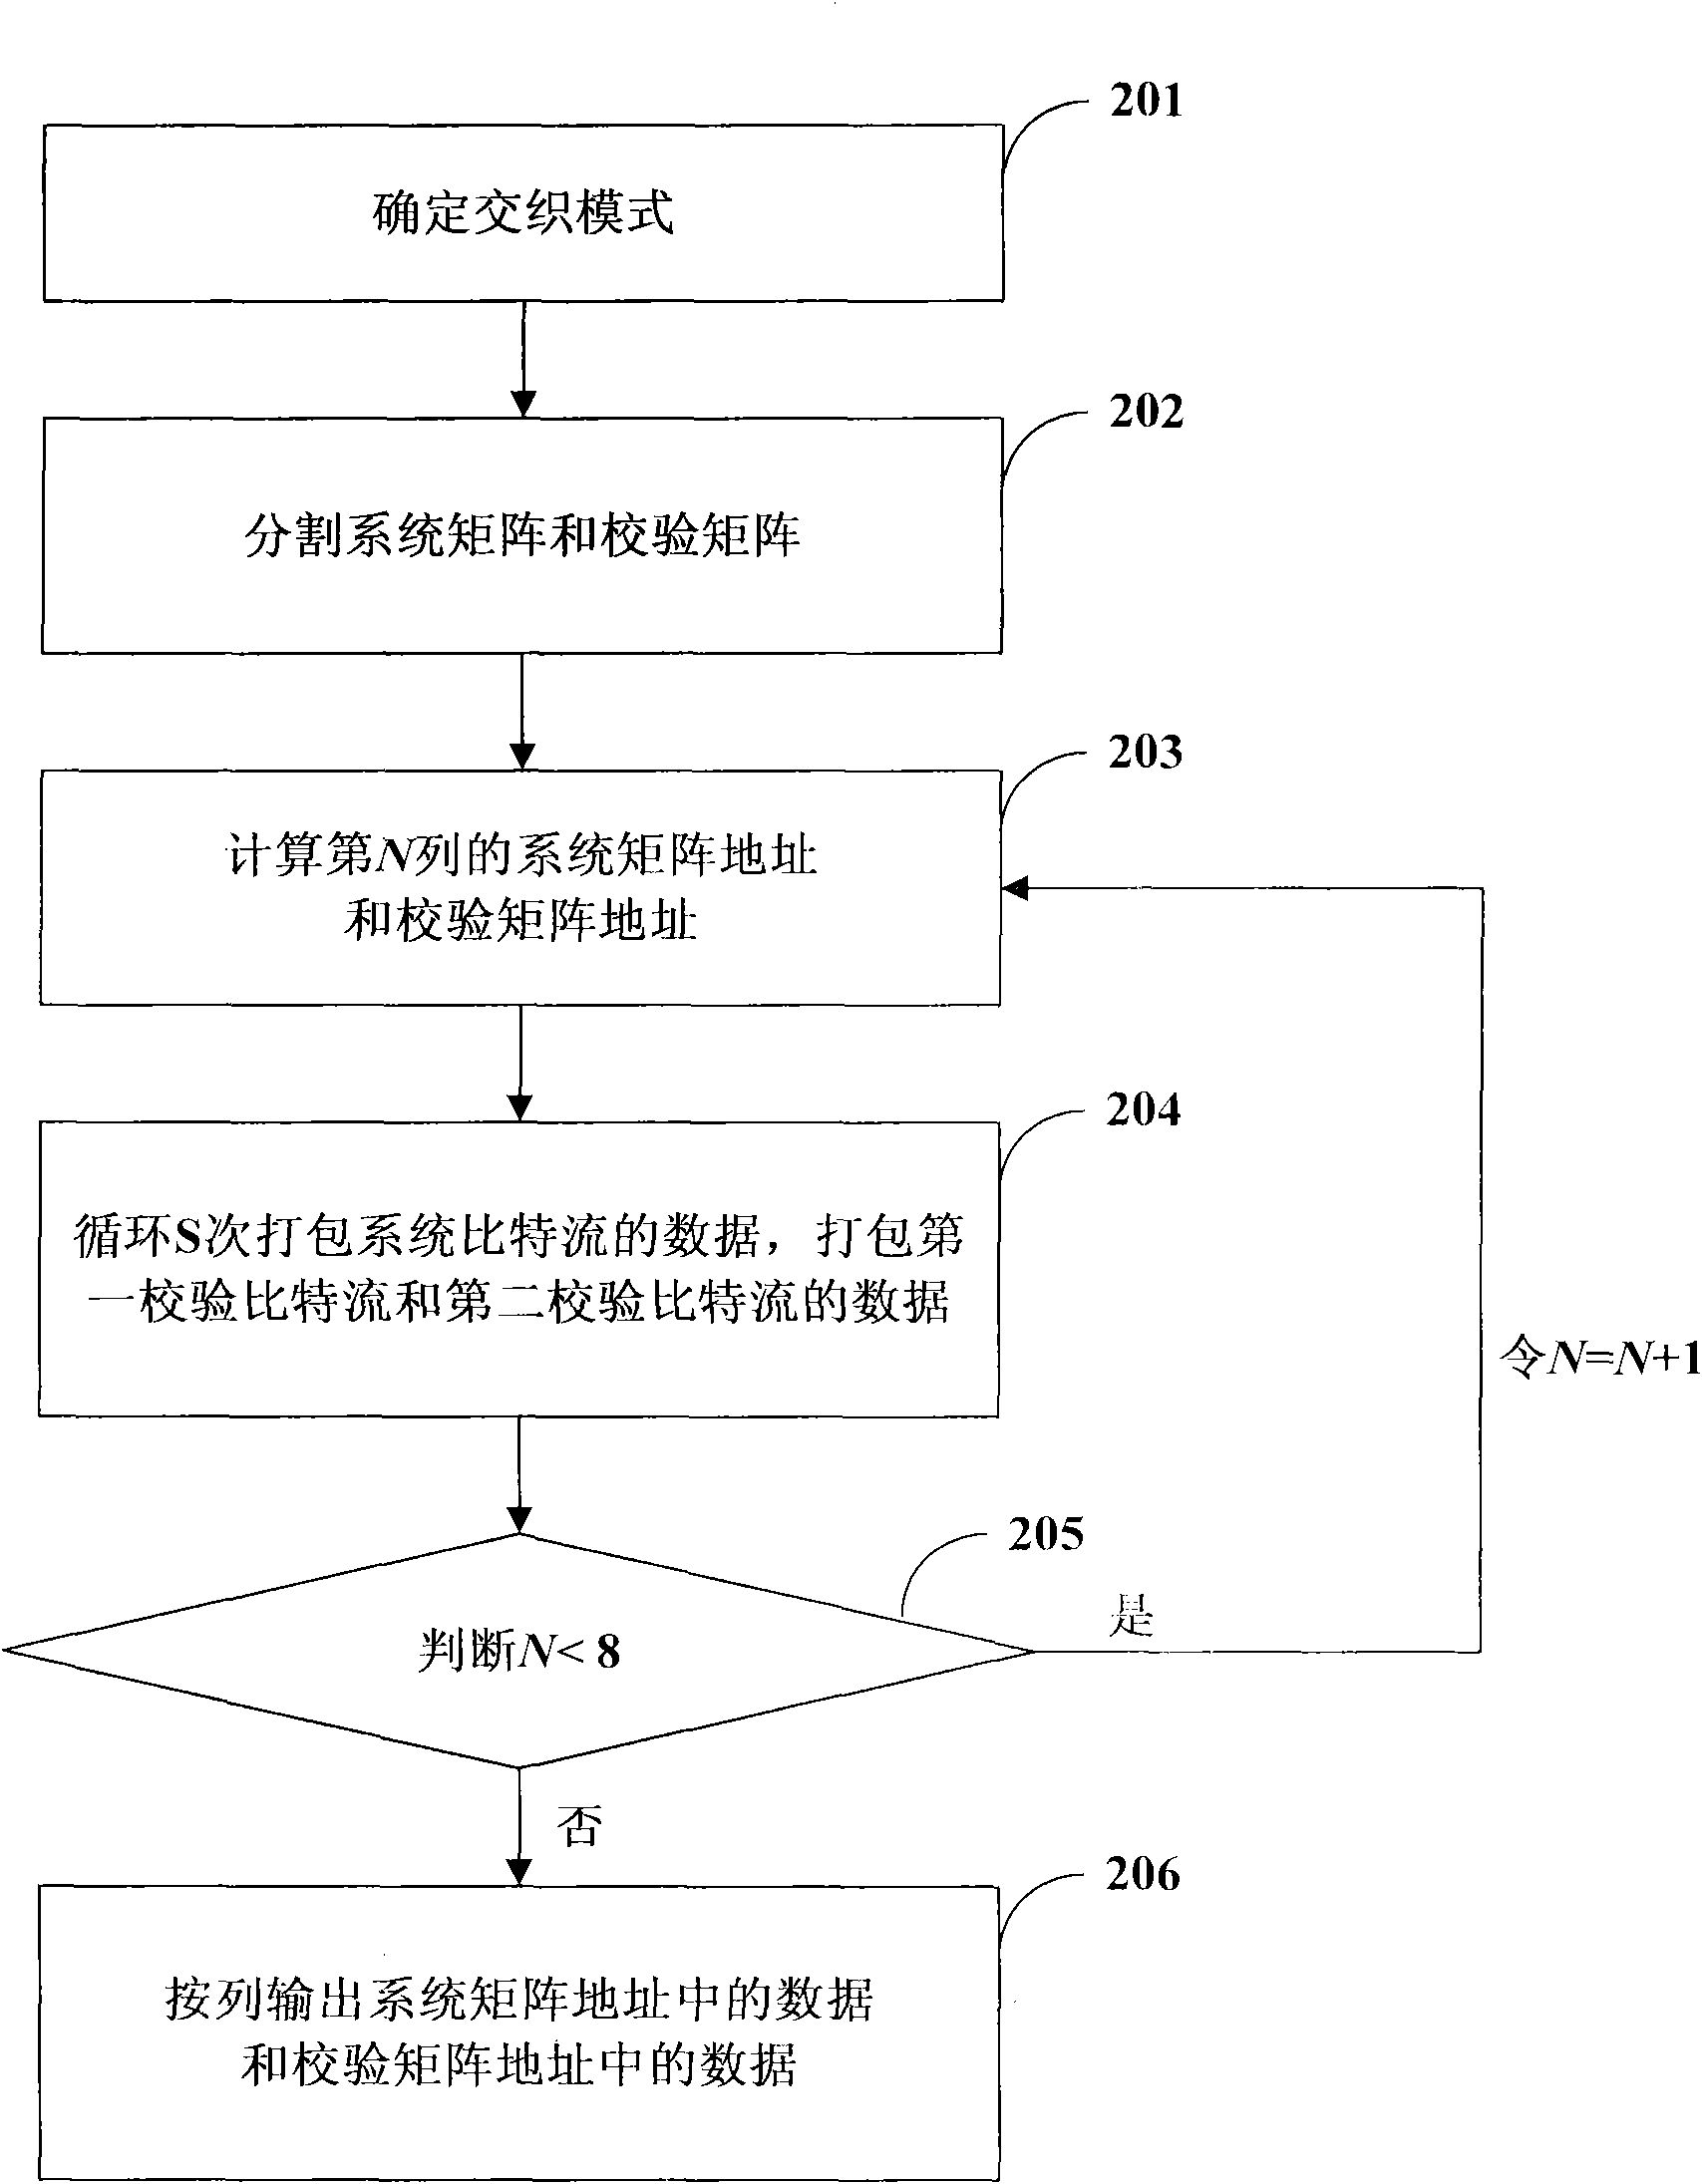 Method for Turbo coding of rate match/de-rate match in LTE (long term evolution) system